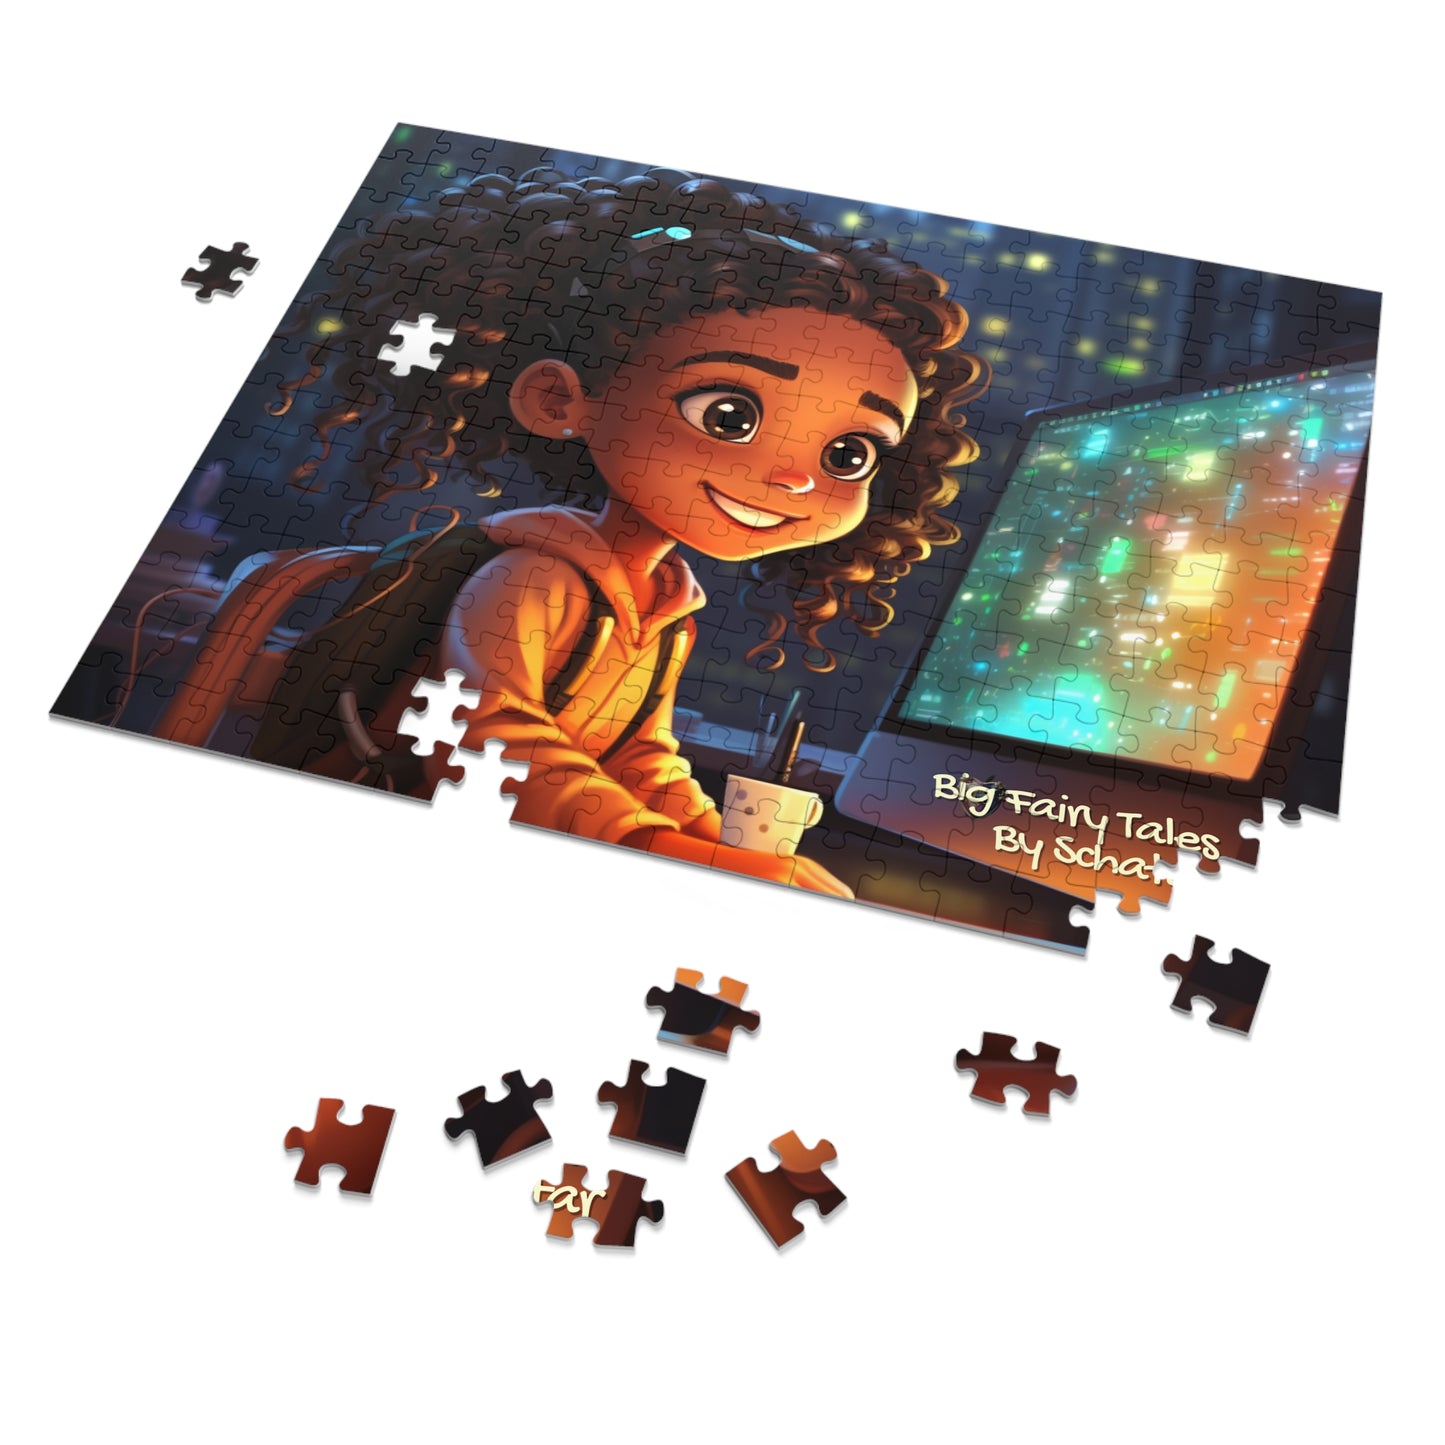 Prompt Engineer - Big Little Professionals Puzzle 16 From Big Fairy Tales By Schatar